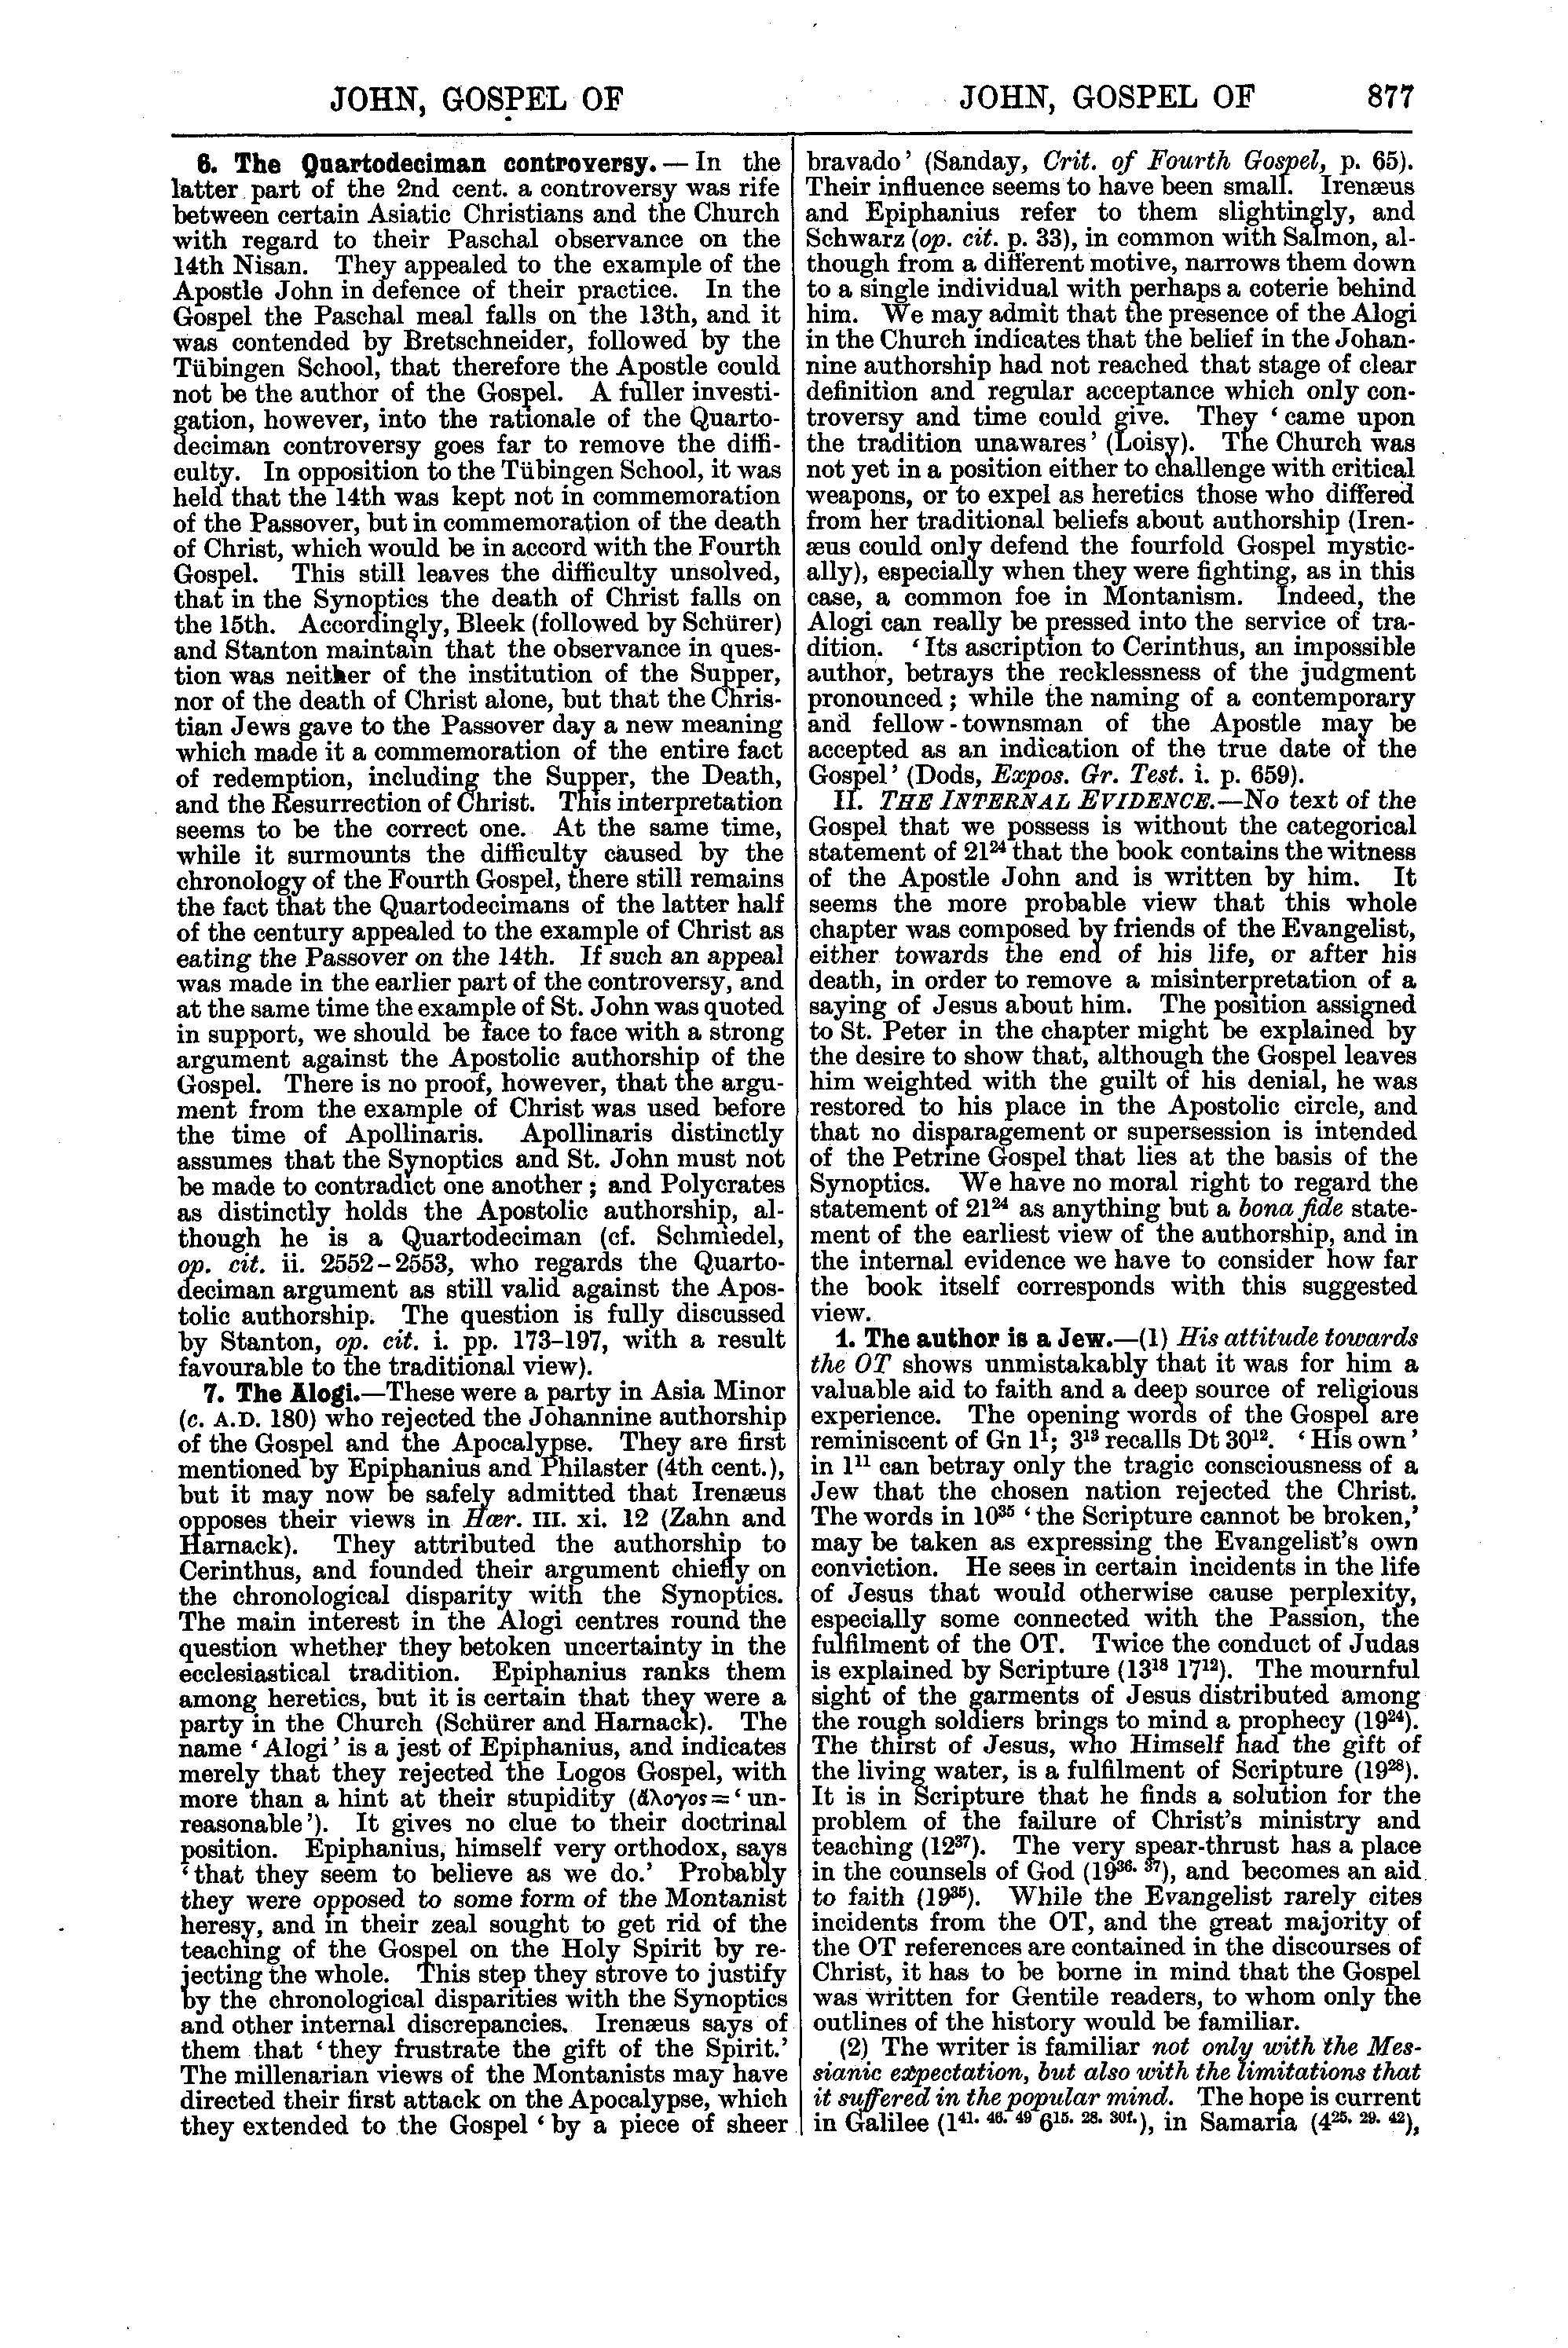 Image of page 877